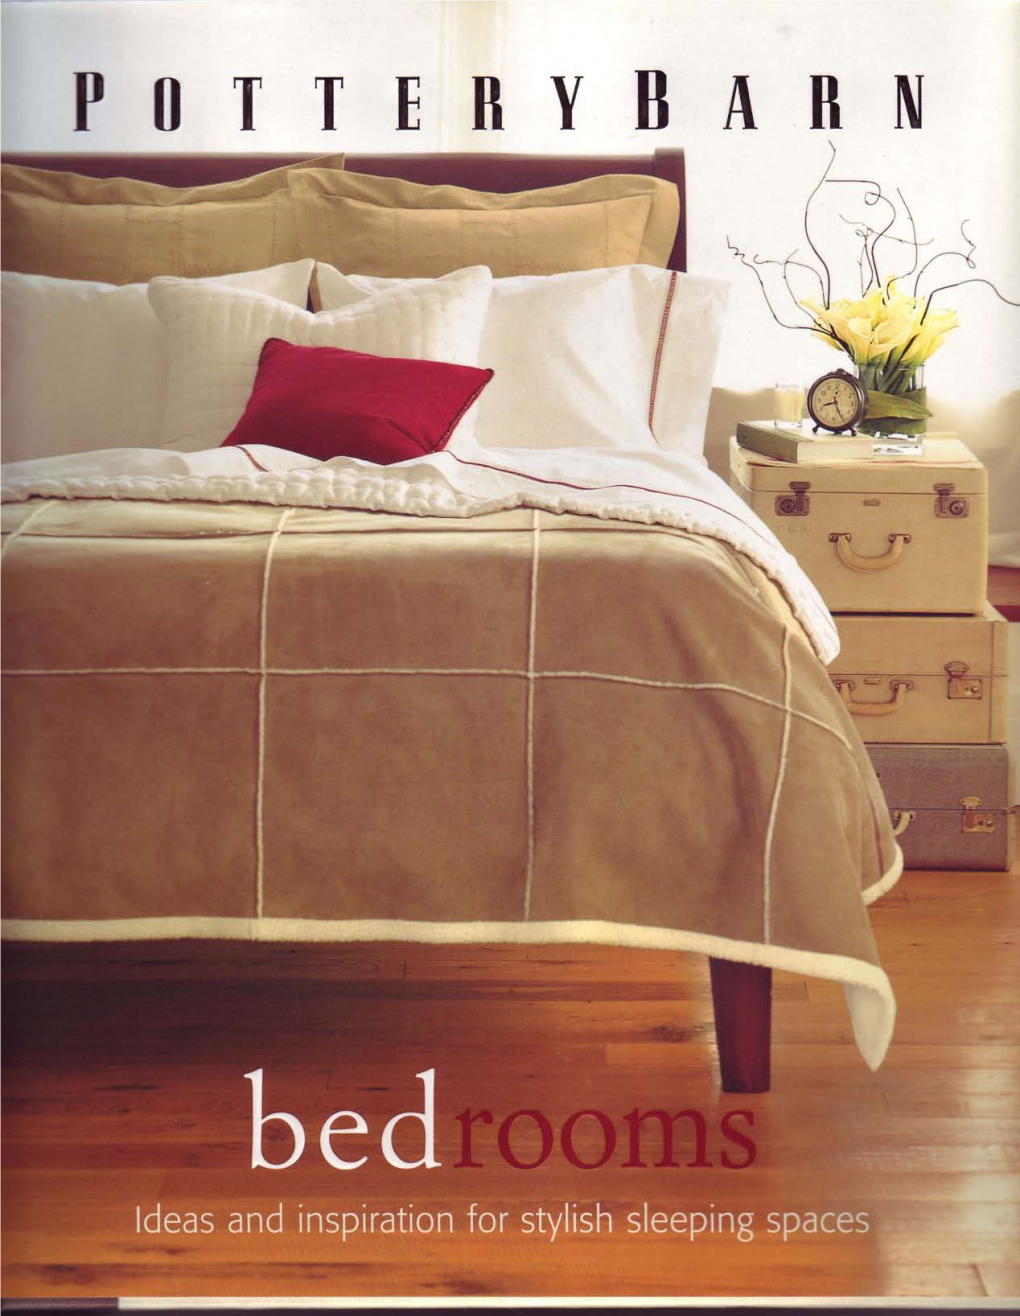 Pottery Barn Bedrooms Book by the Potterybarn